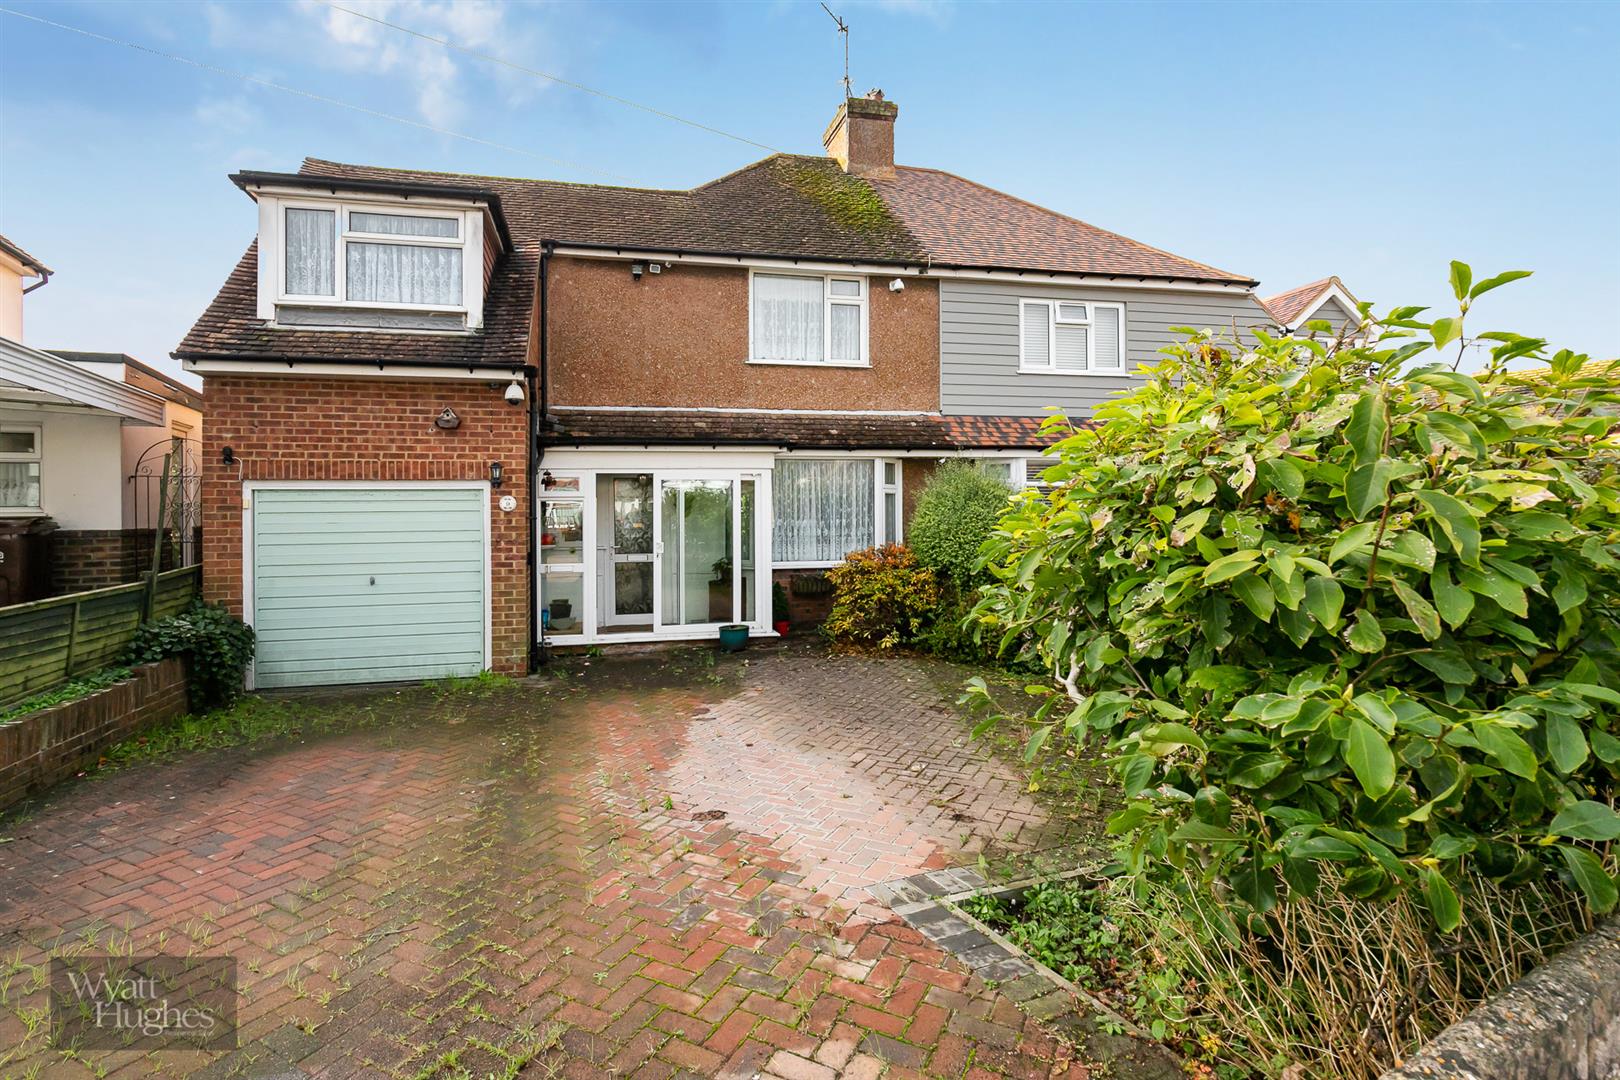 4 bed semi-detached house for sale in St. James Crescent, Bexhill-On-Sea, TN40